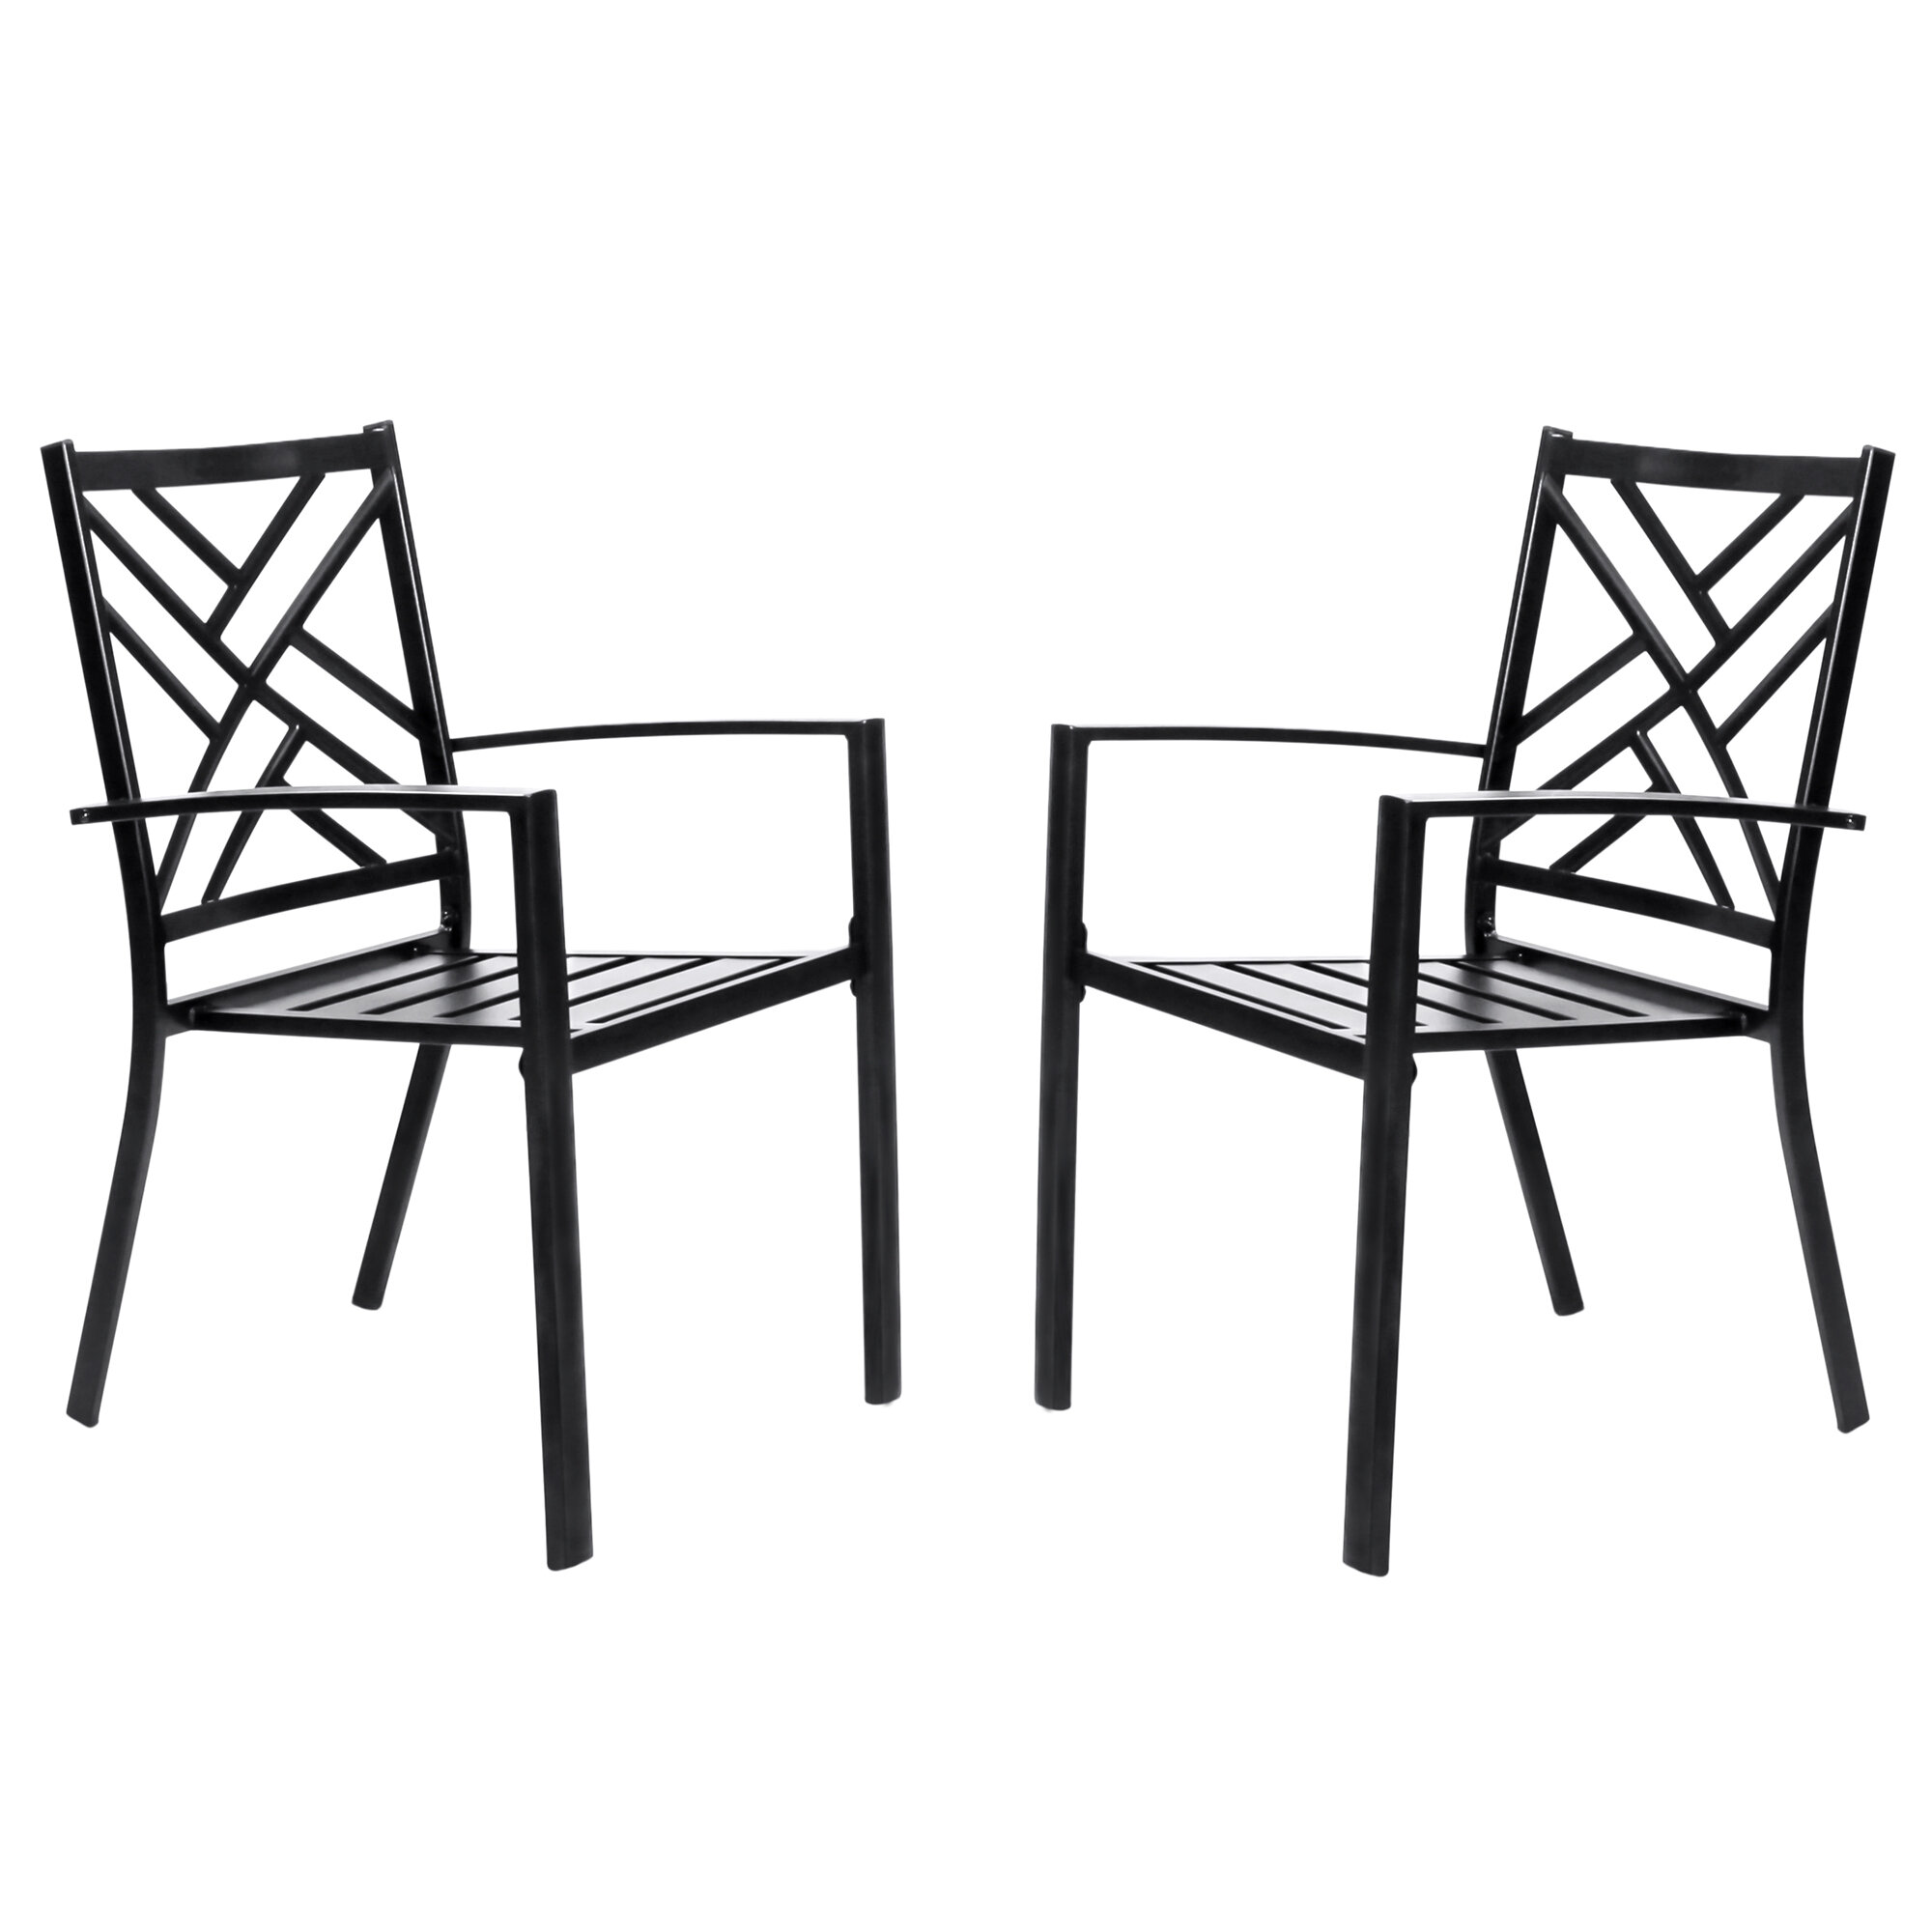 Details about   Patio Furniture Metal Chair Set of 2 Bistro Deck Outdoor Dining Chairs Stackable 